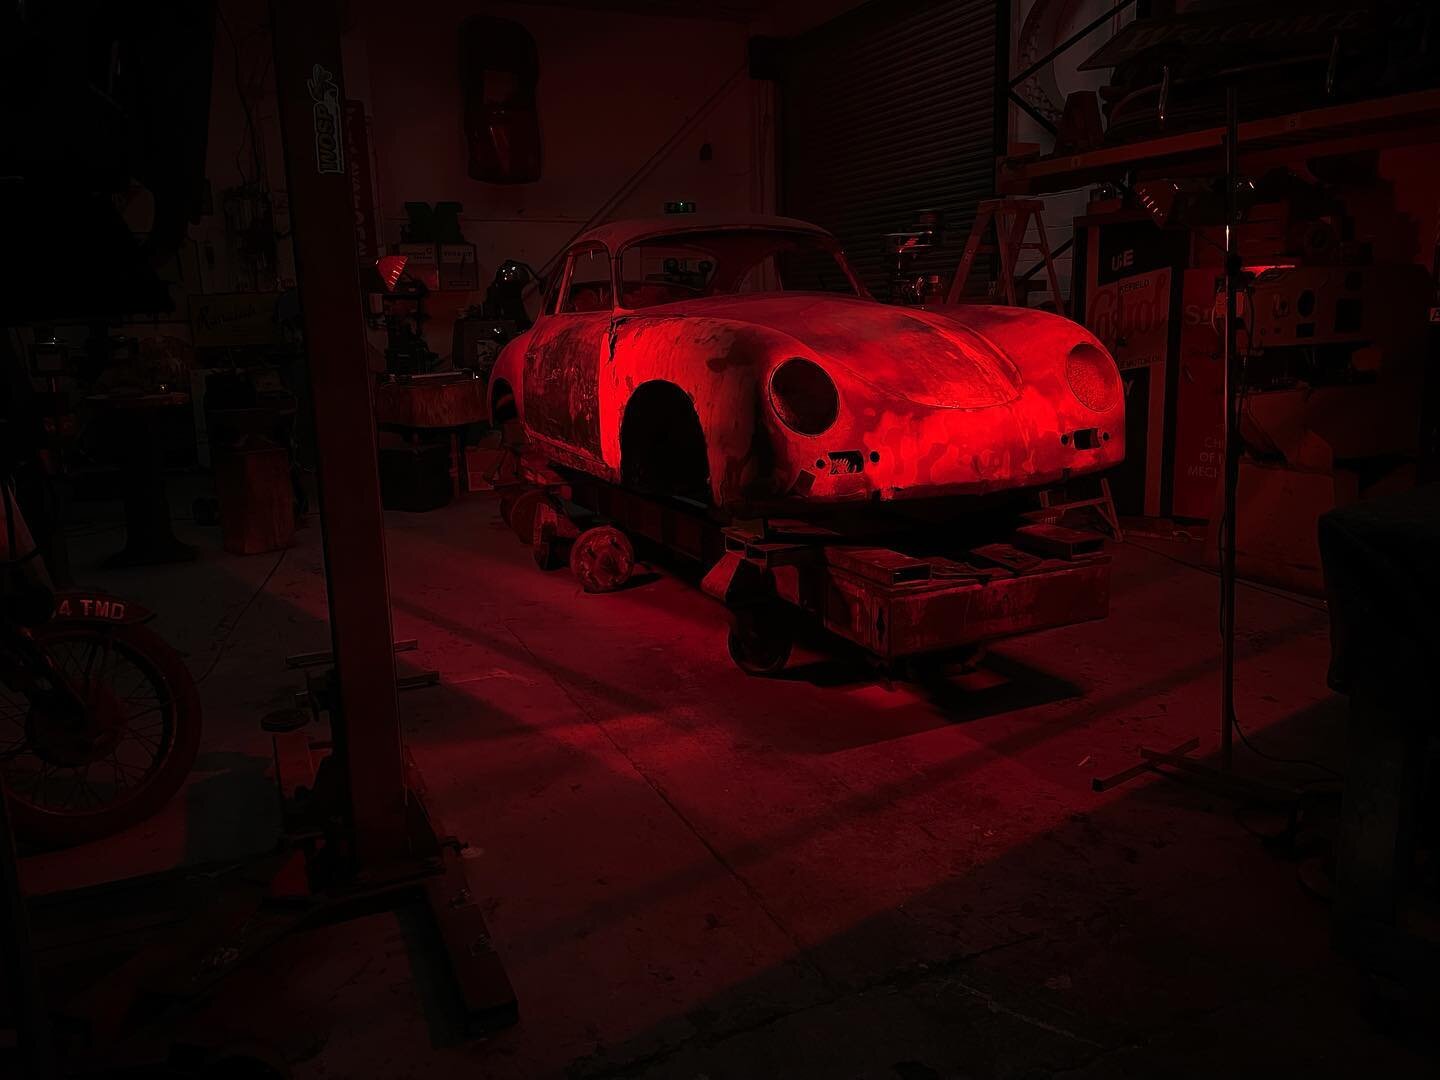 It&rsquo;s an exciting day today, I am getting the Porsche 3D scanned! 
 ⠀⠀⠀⠀⠀⠀⠀⠀⠀⠀⠀⠀
It&rsquo;s a fascinating process I have never had any experience with before, having a 3D model of the car will help me so much with the restoration, I can&rsquo;t 